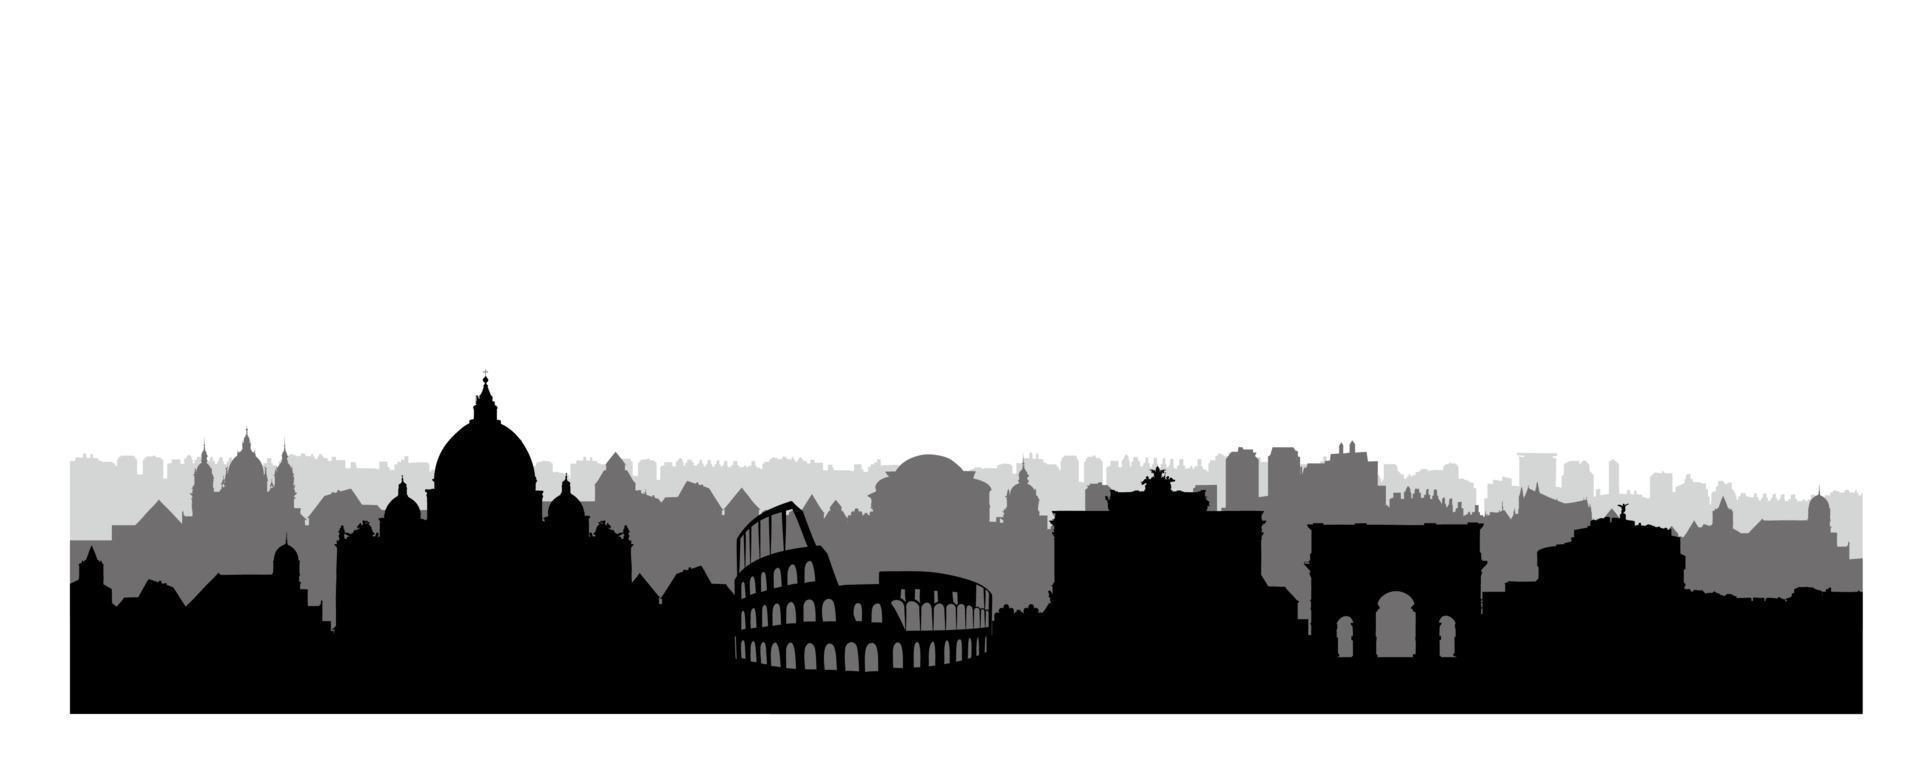 Rome city buildings silhouette. Italian urban landscape. Rome cityscape with landmarks. Travel Italy skyline background. Vacation in Europe wallpaper. vector